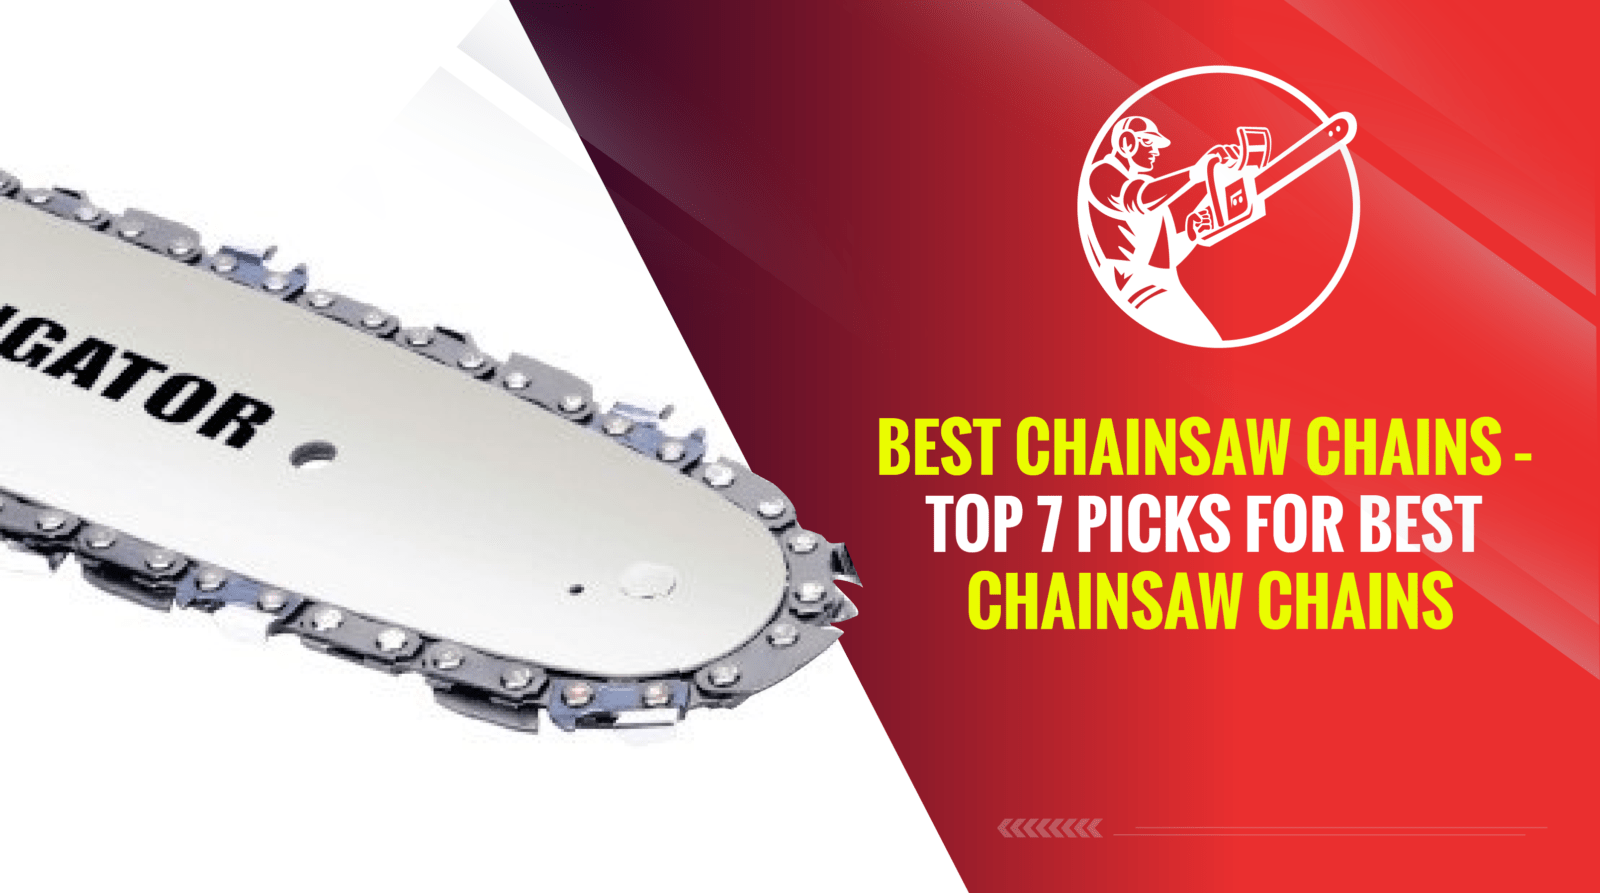 Best Chainsaw Chains – Top 7 Picks for Best Chainsaw Chains